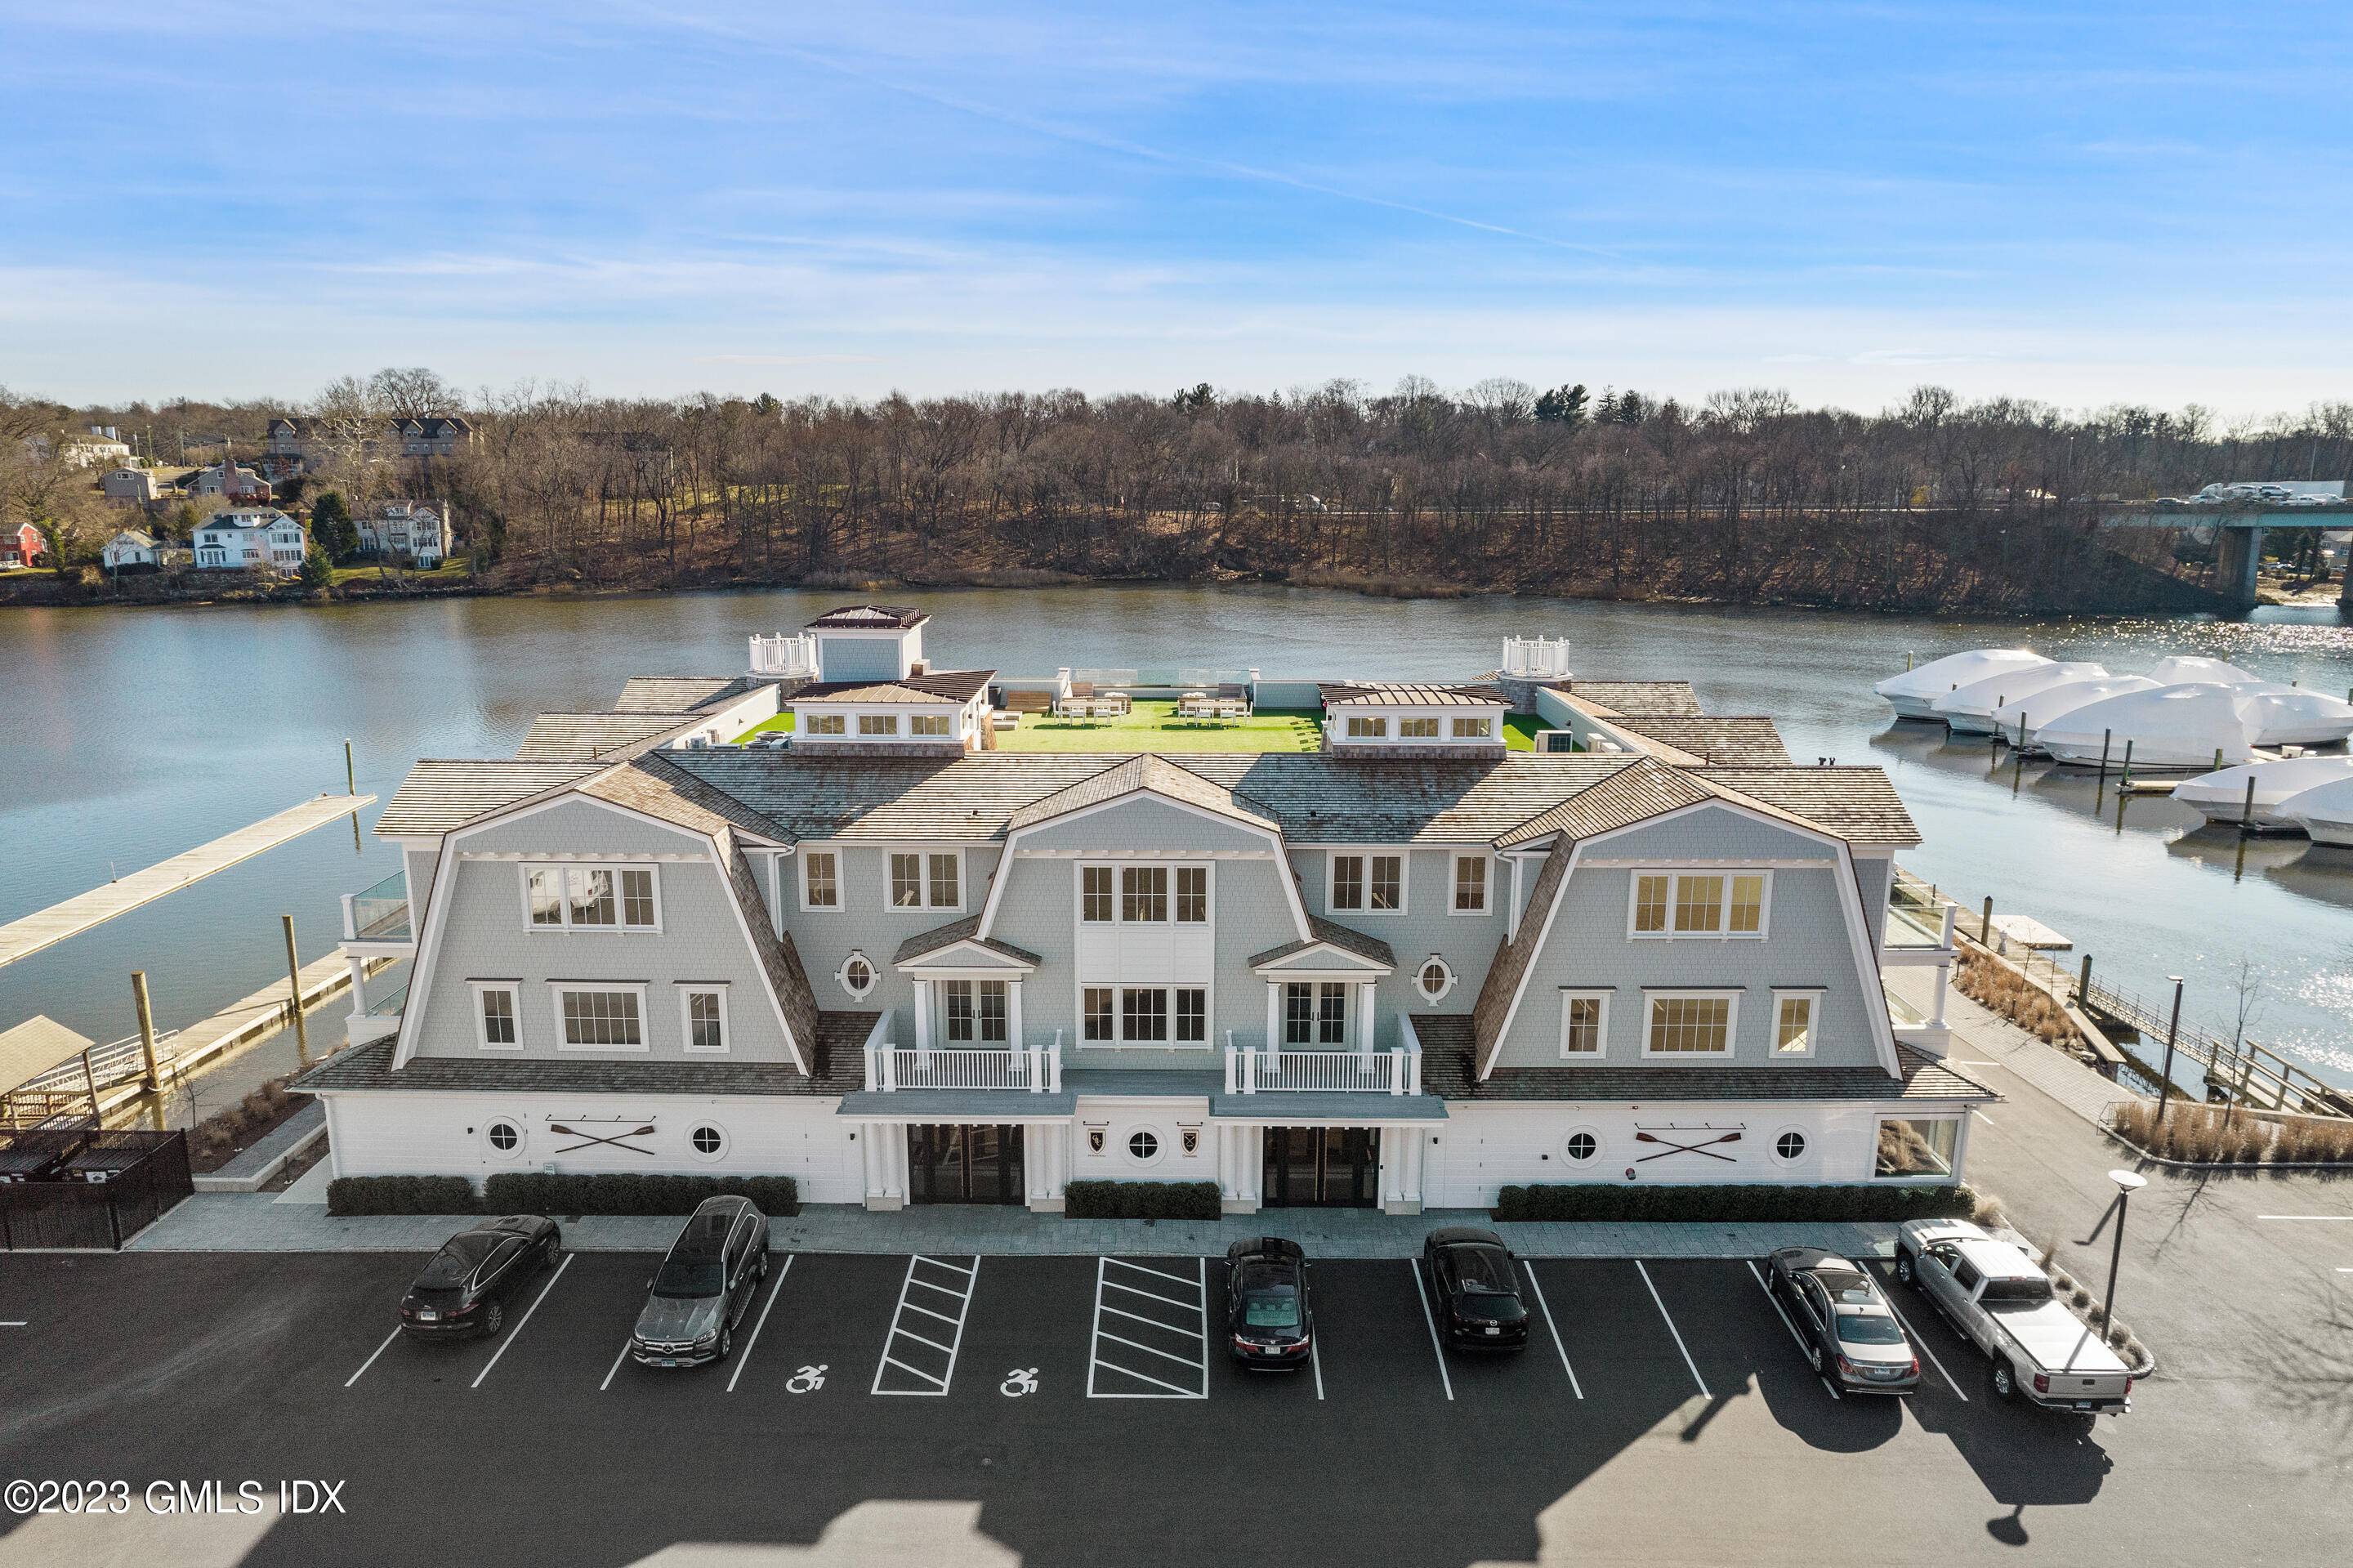 Welcome to the Residences at Greenwich Rowing Club, a modern luxury condo development overlooking Cos Cob Harbor.